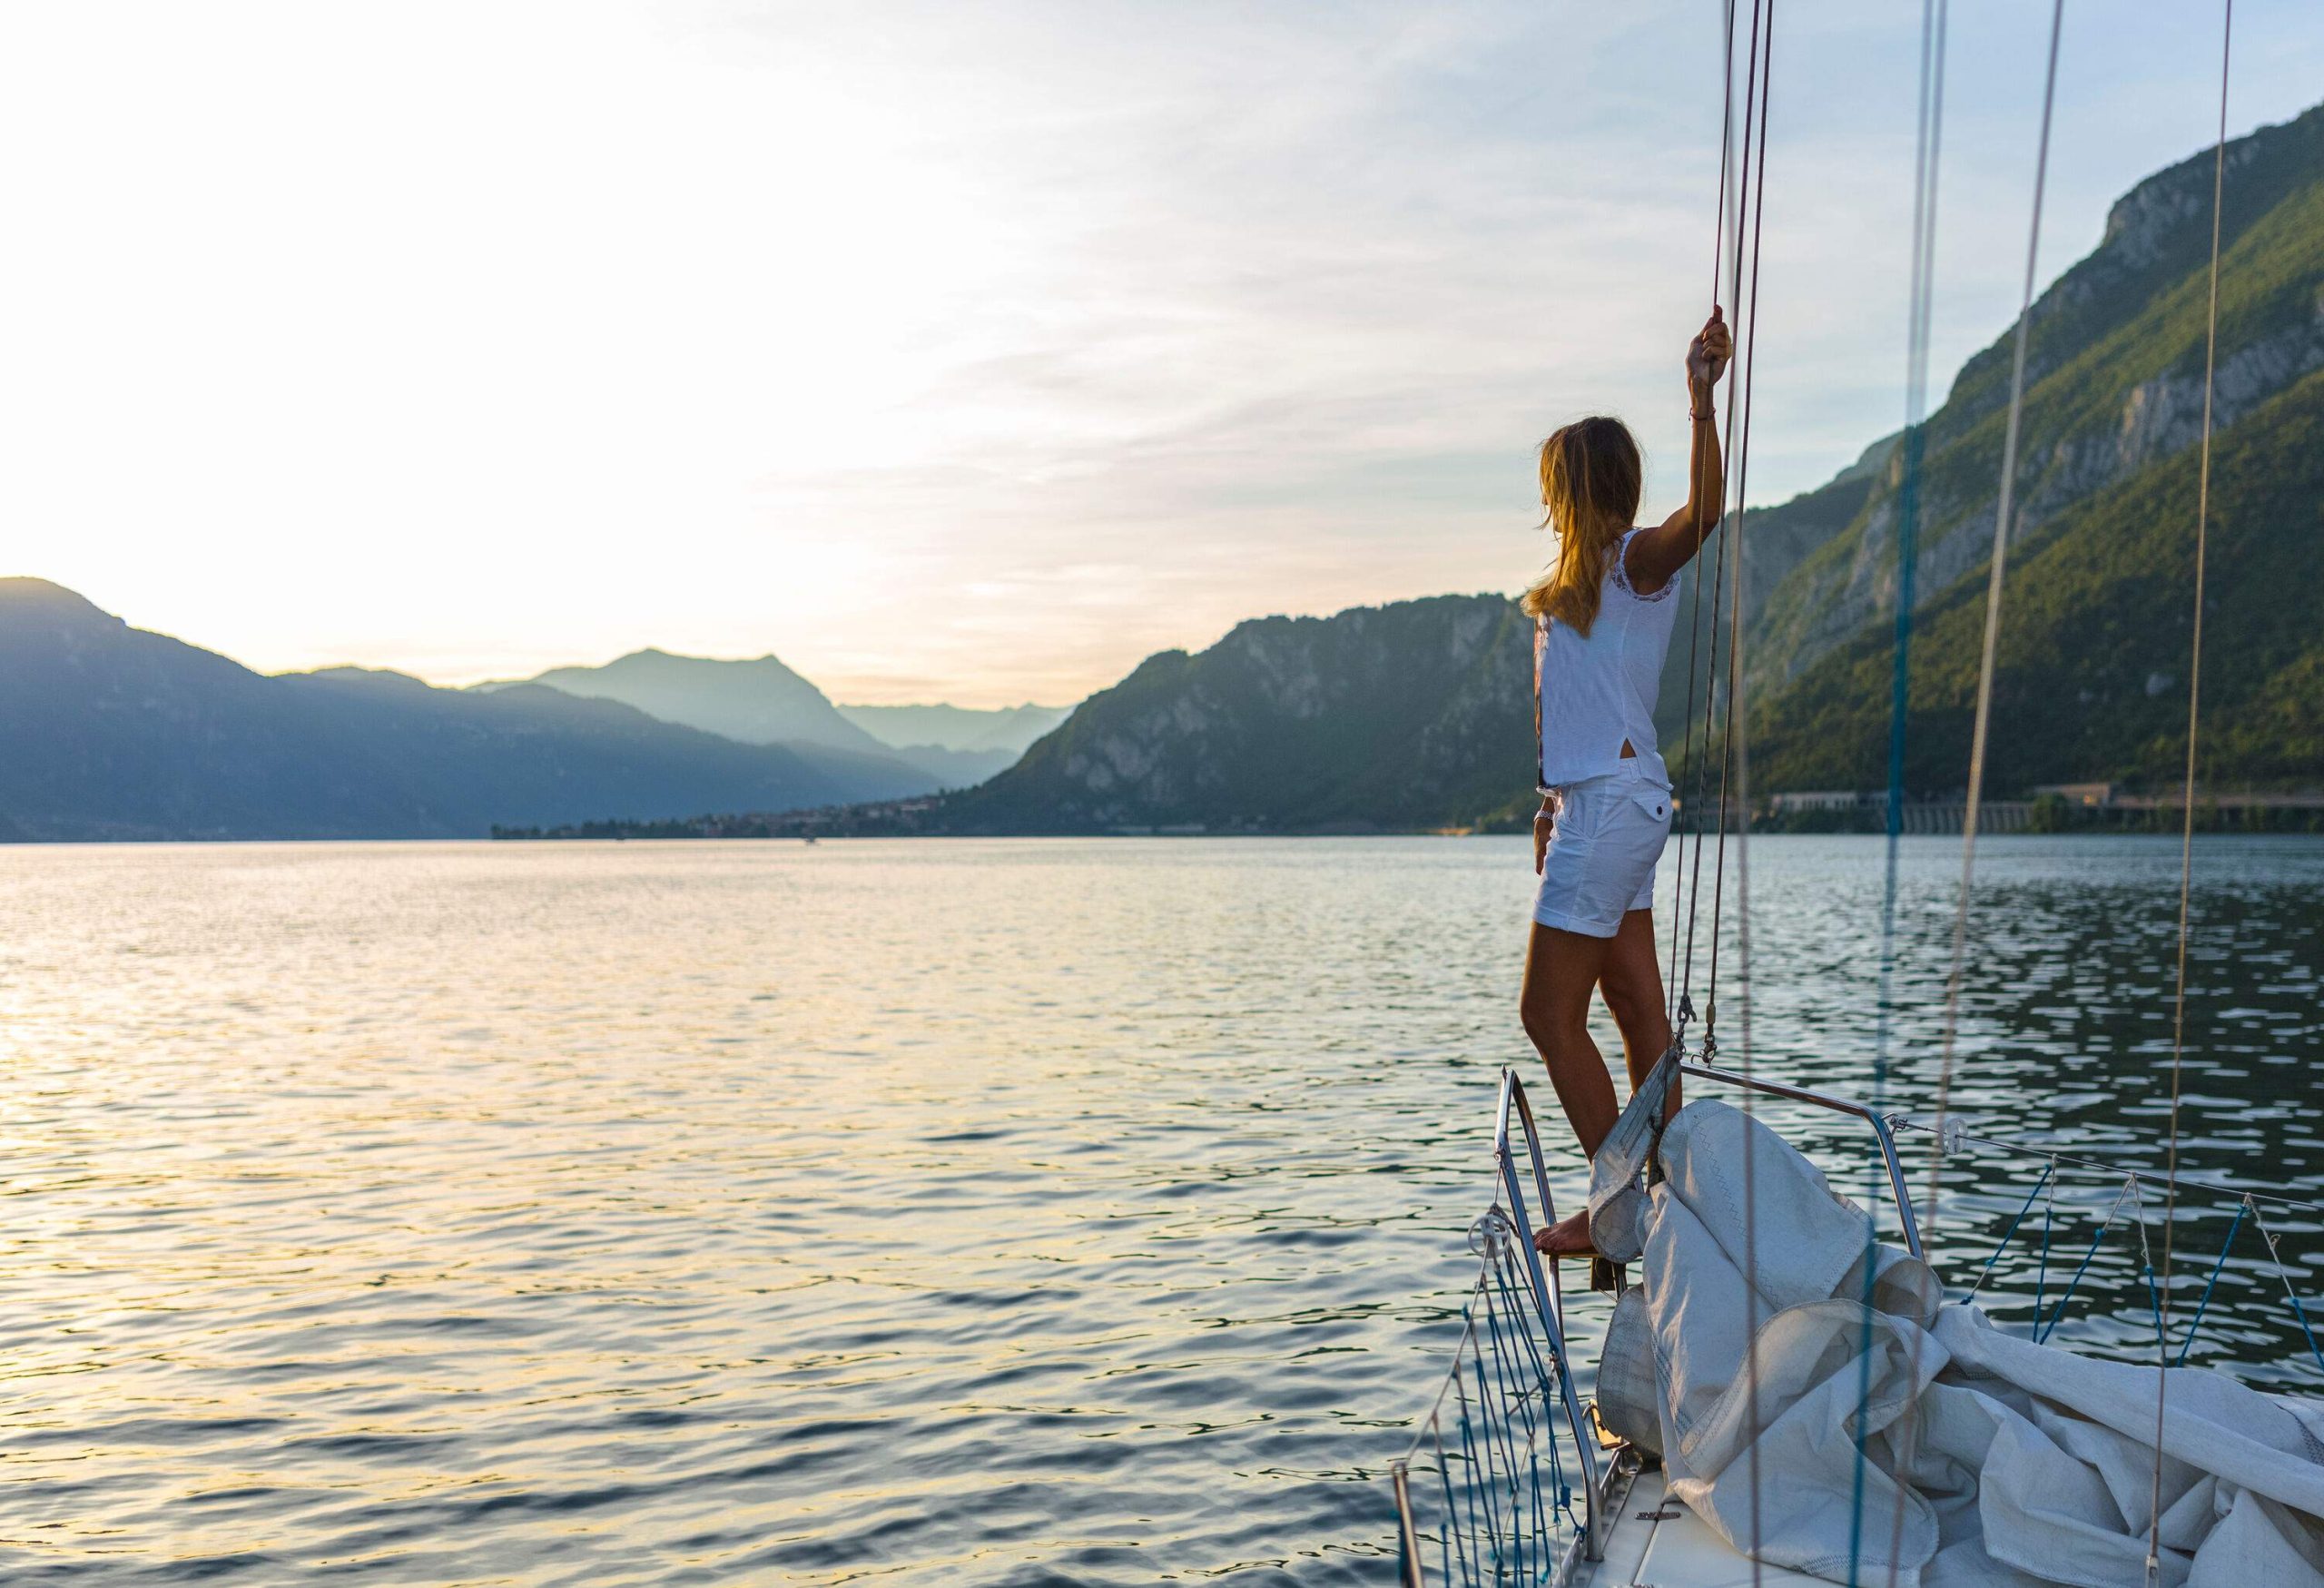 A person in a white shirt stands on the edge of a sailboat's front deck grabbing the ropes while gazing at the lake.